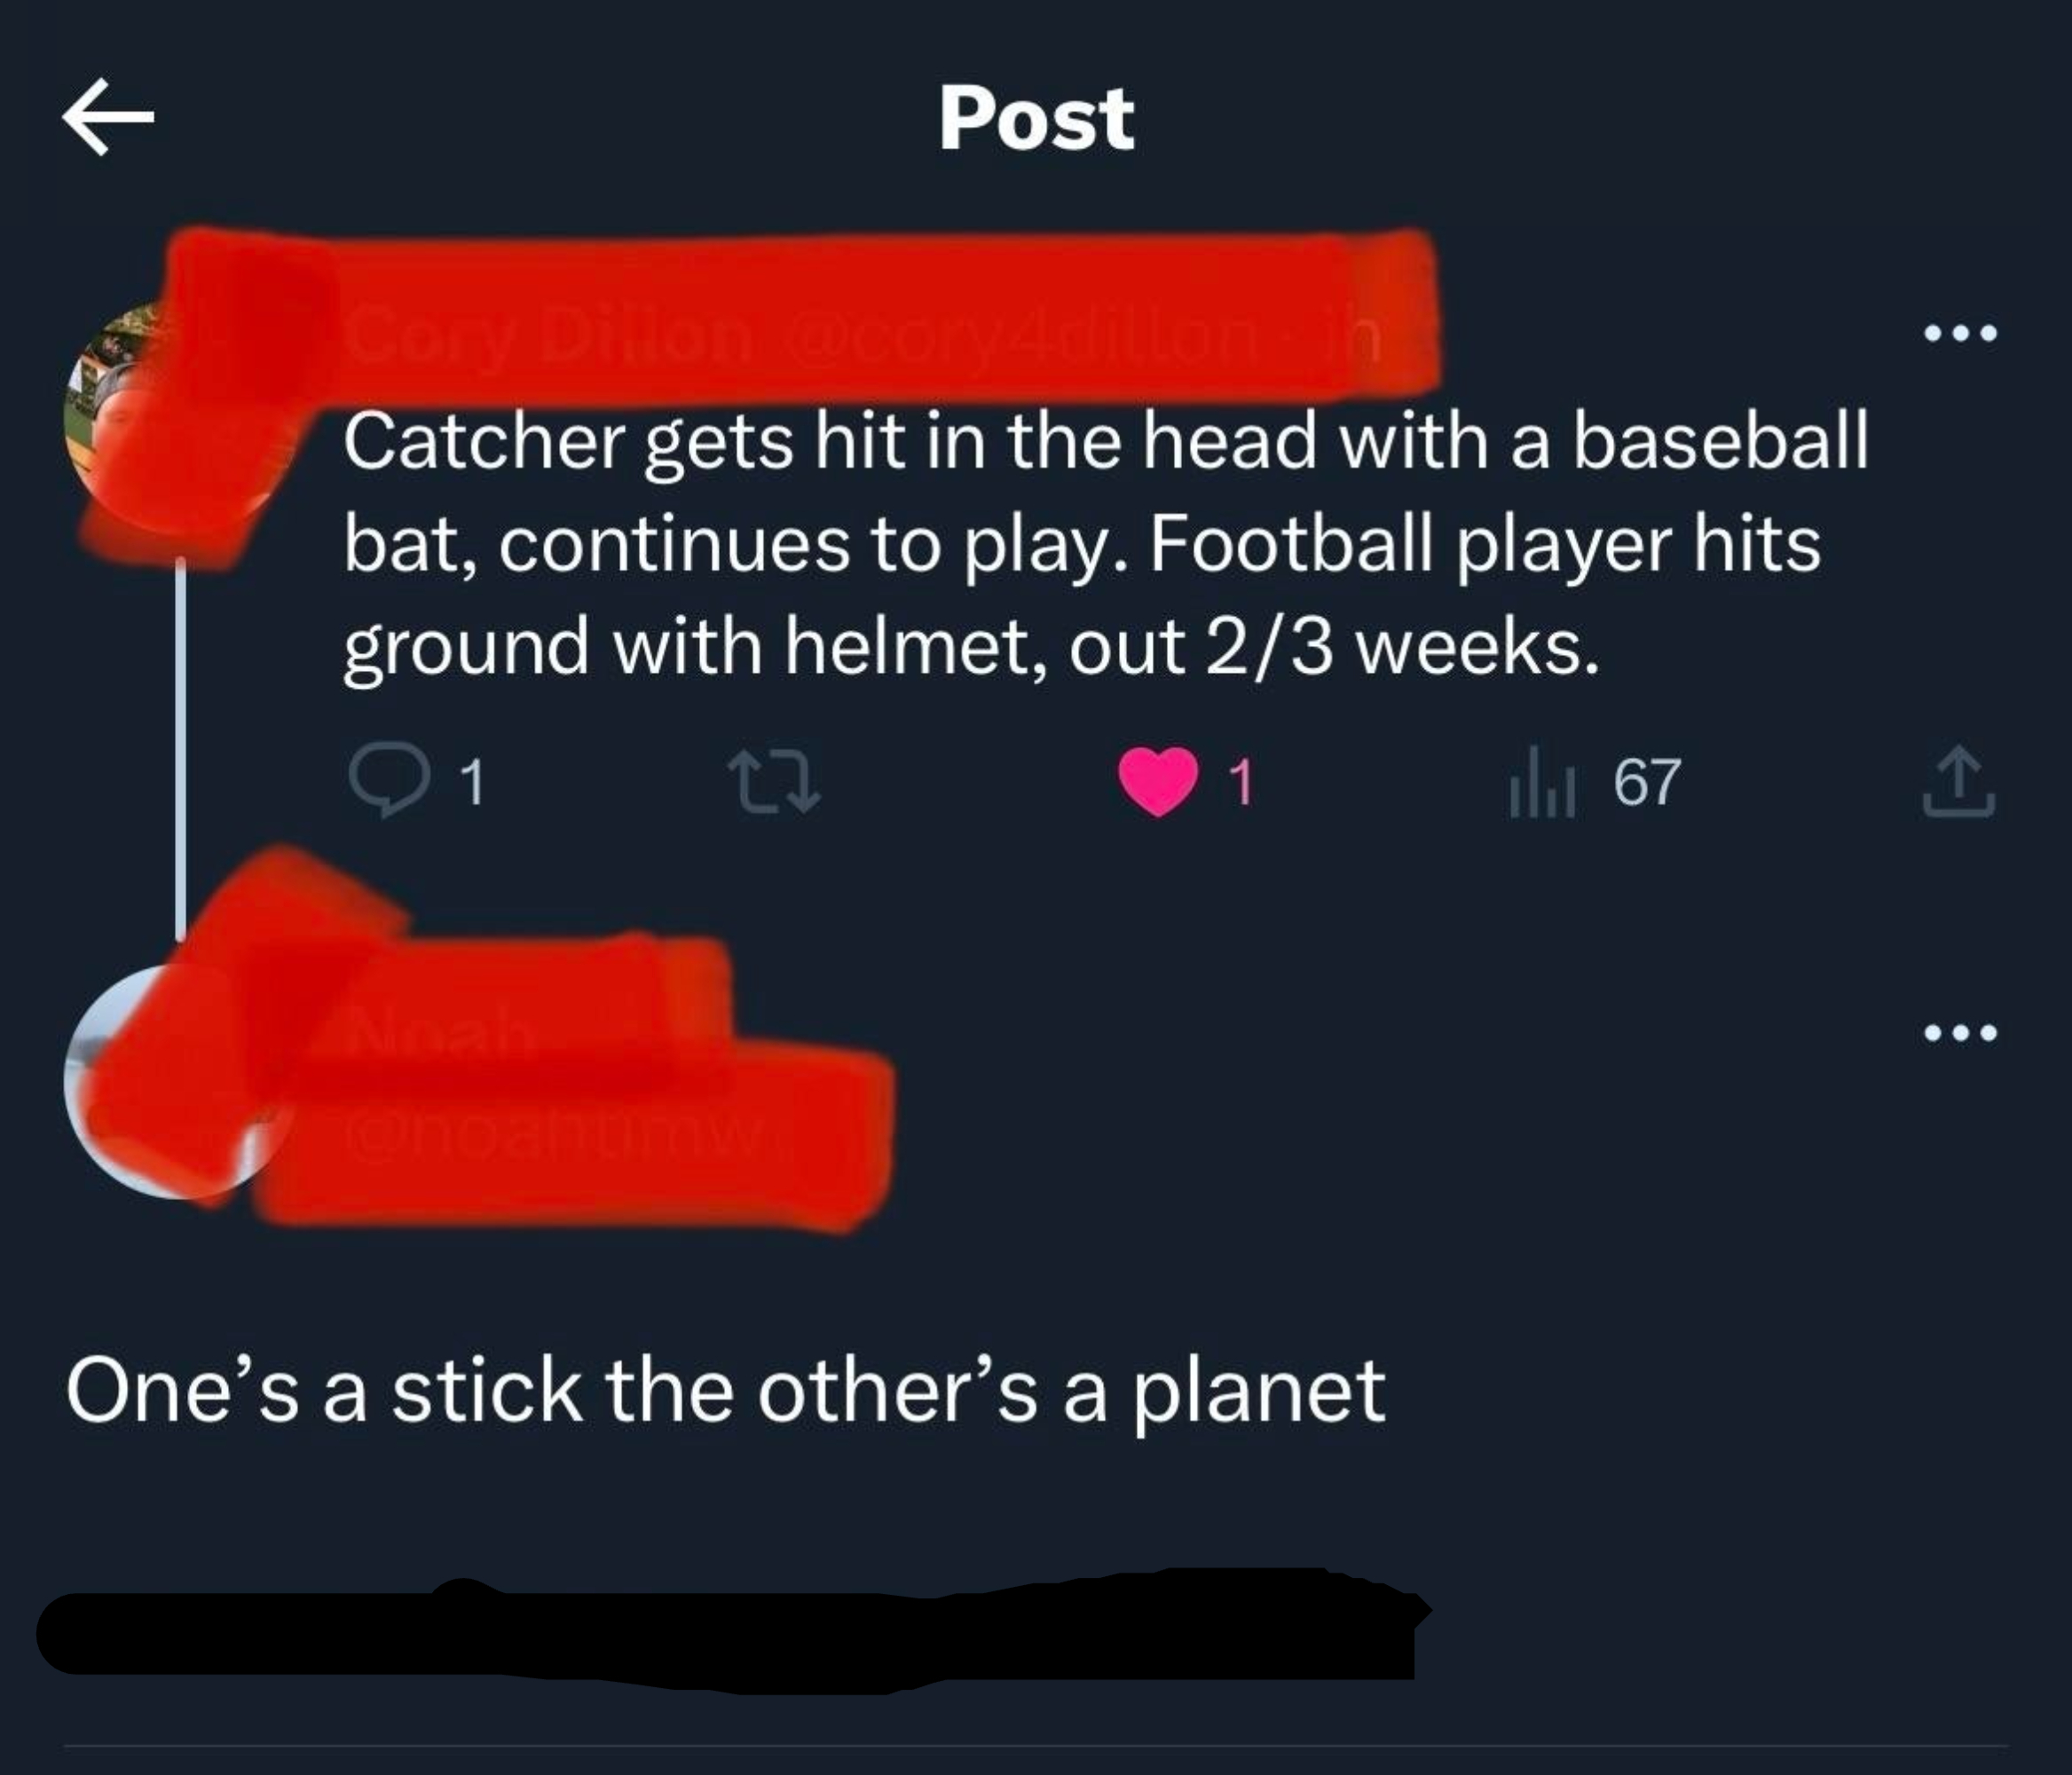 &quot;Catcher gets hit in the head iwth a baseball bat, continues to play; football player hits ground with helmet, out 2/3 weeks,&quot; &quot;One&#x27;s a stick, the other&#x27;s a planet&quot;